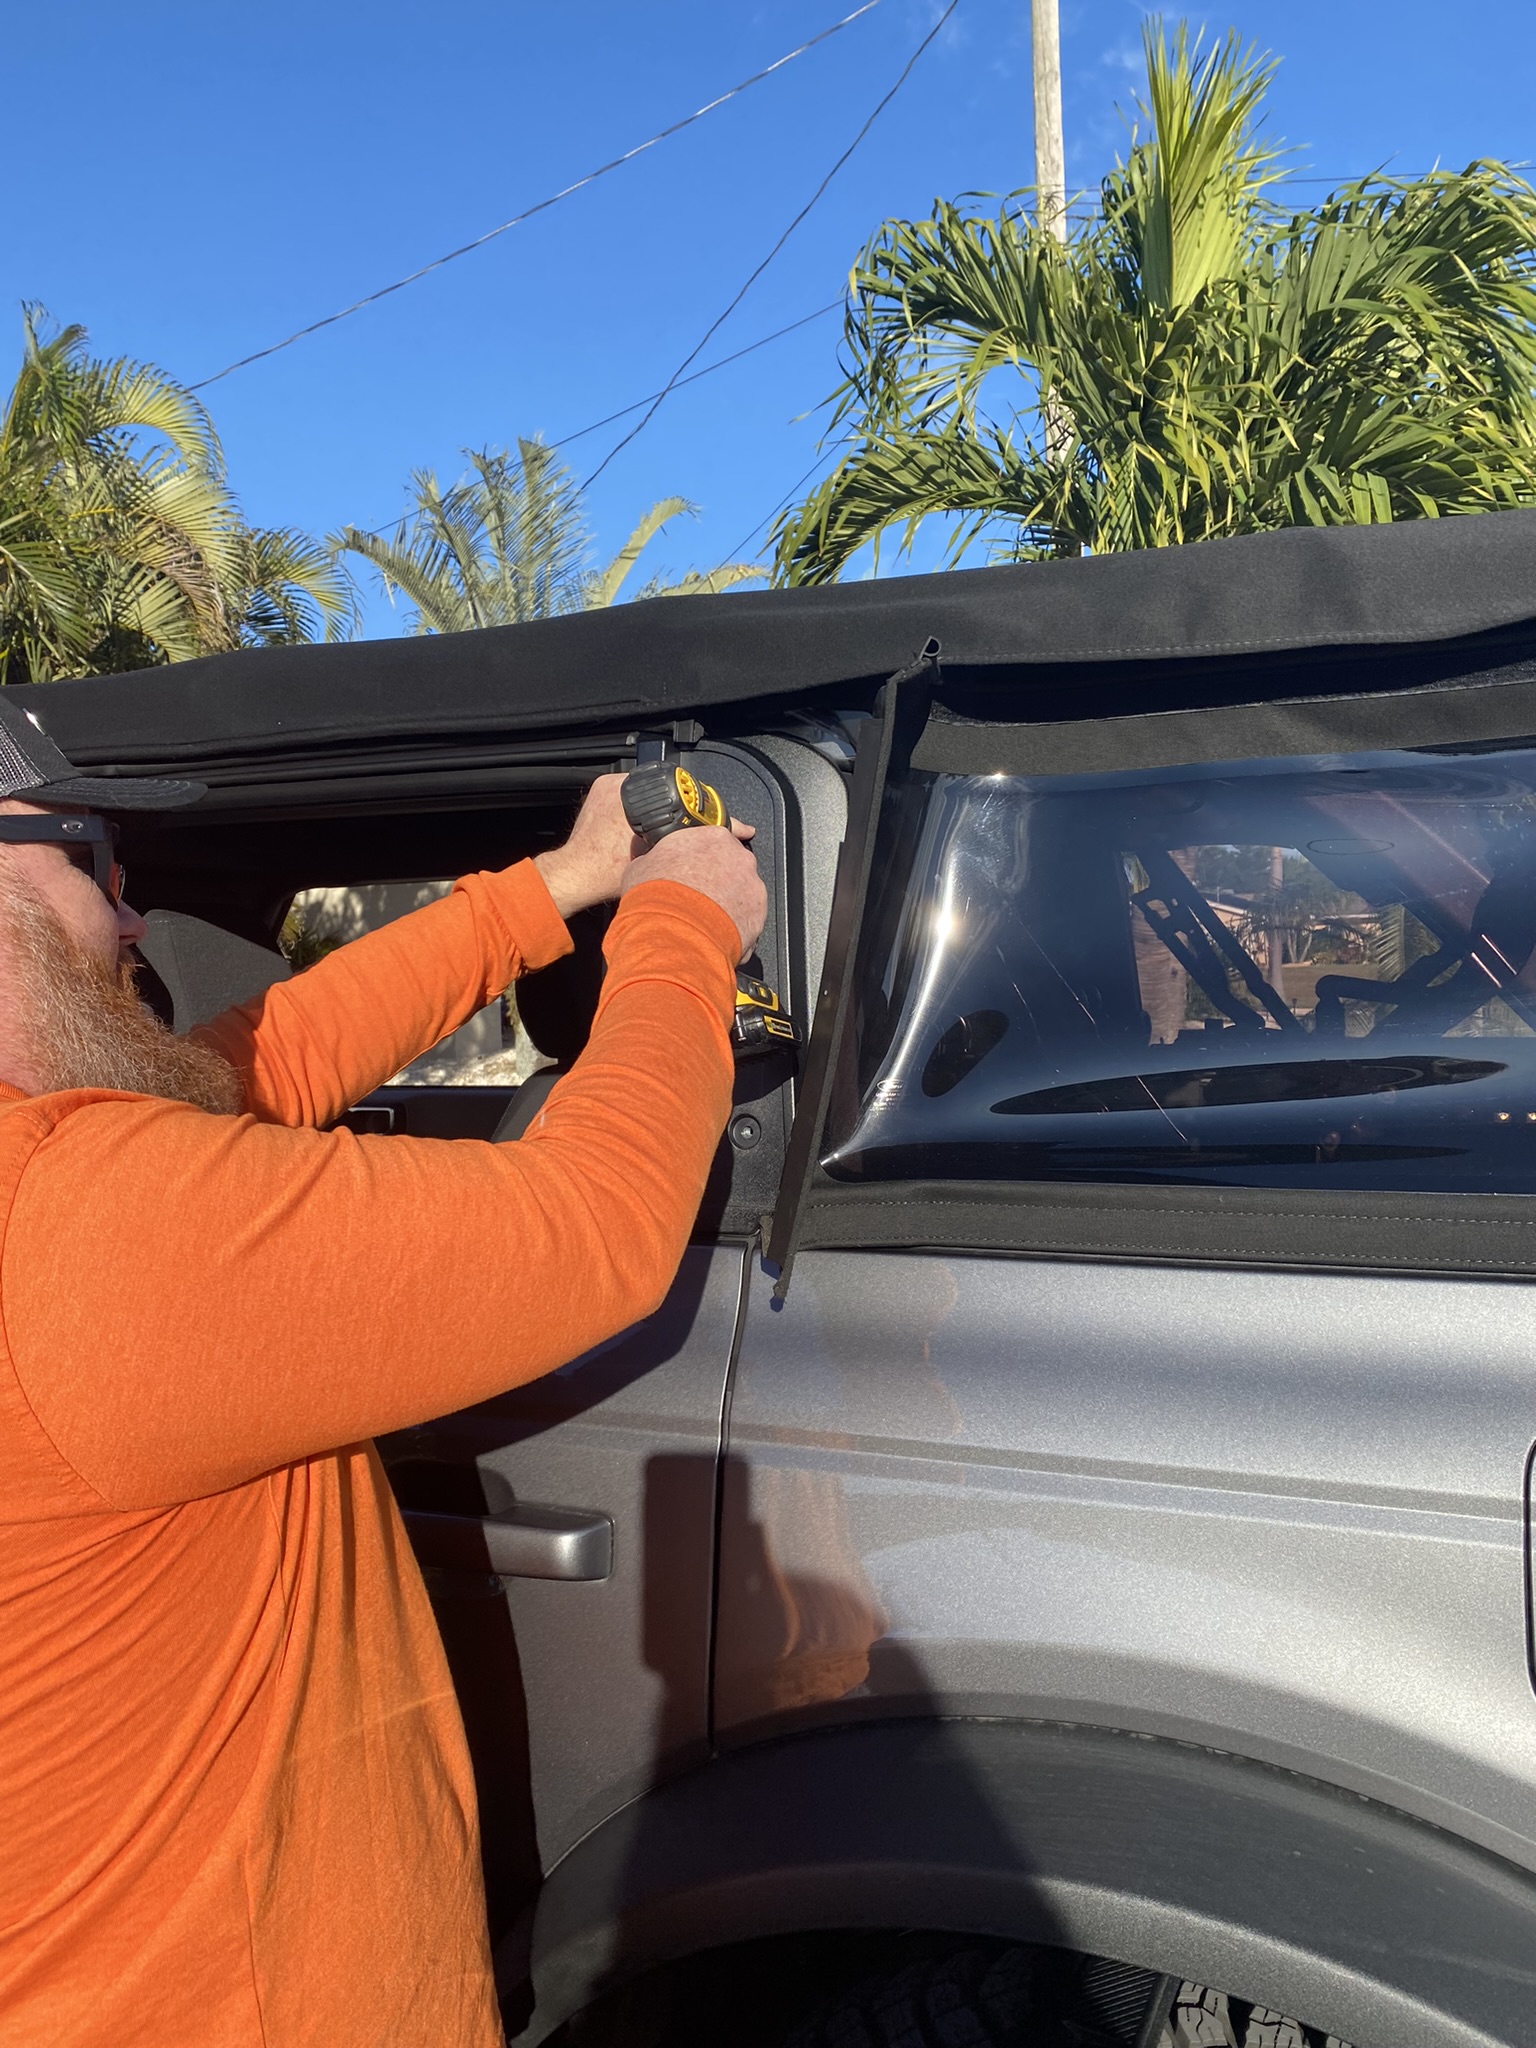 Ford Bronco Soft Top <--> Hard Top Swap : Tips & Lessons Learned - UPDATED 4CEAEC6B-F5C4-4D9E-852A-D96A3018E108